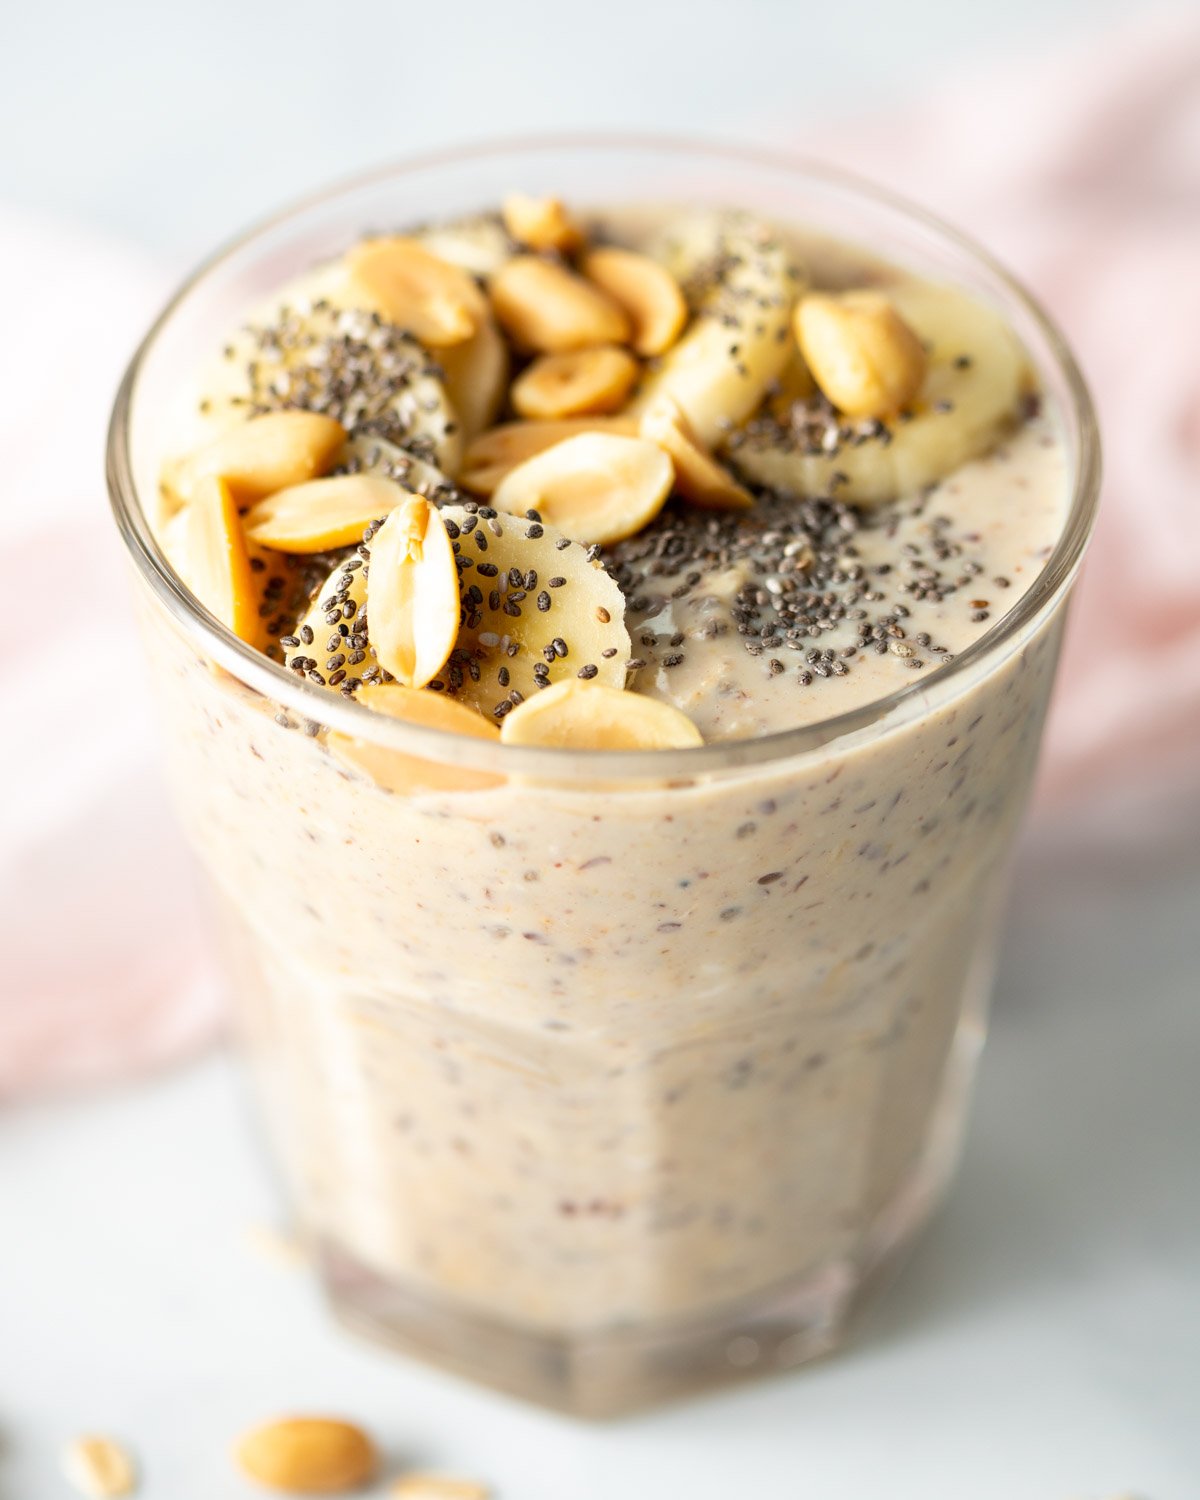 Glass filled with vegan peanut butter overnight oats. Topped with bananas.
